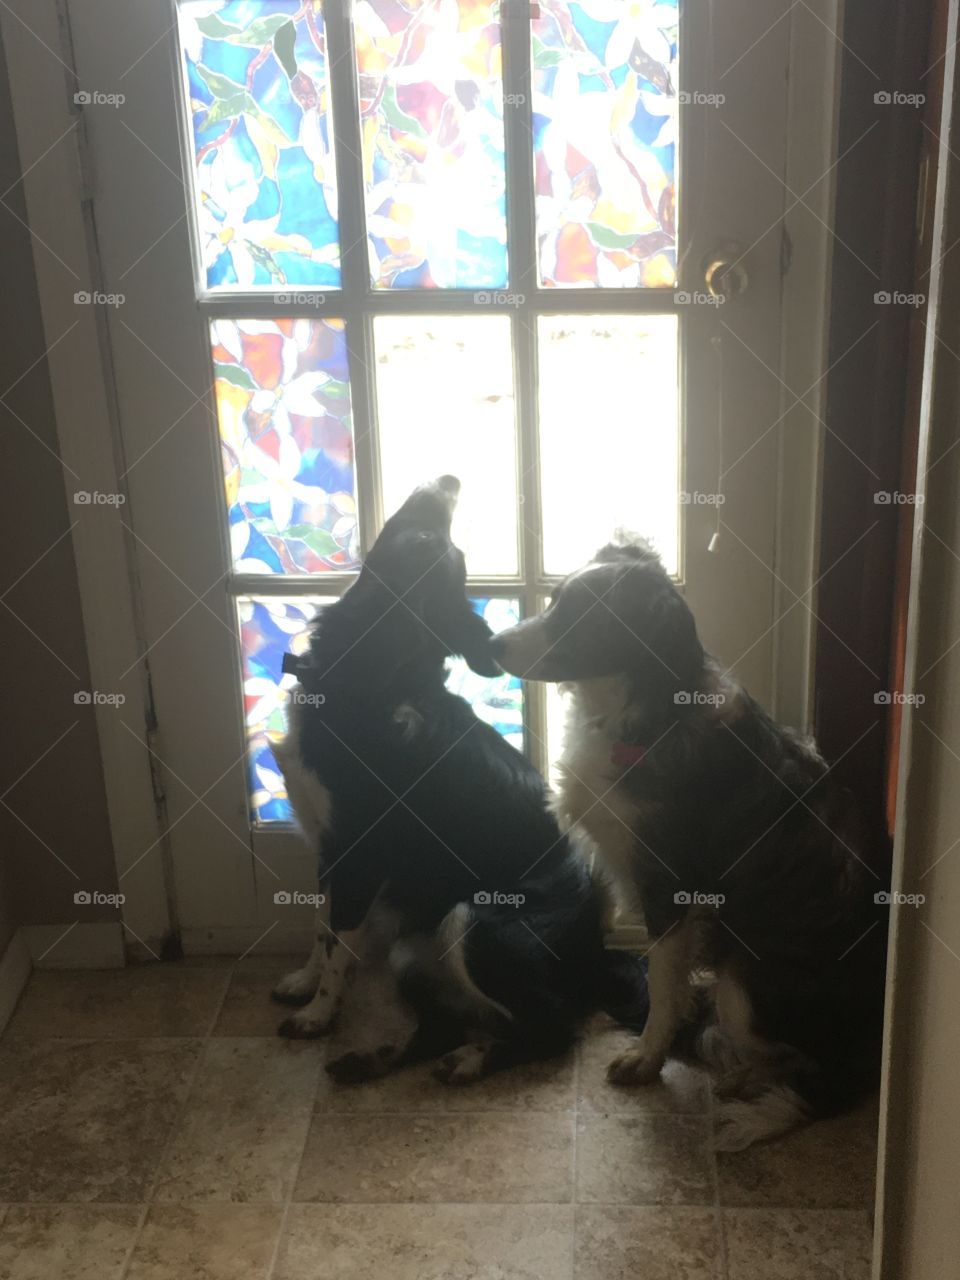 hope and lacy sister australlian shepars britney spaniel mixes waiting at the door to go outside